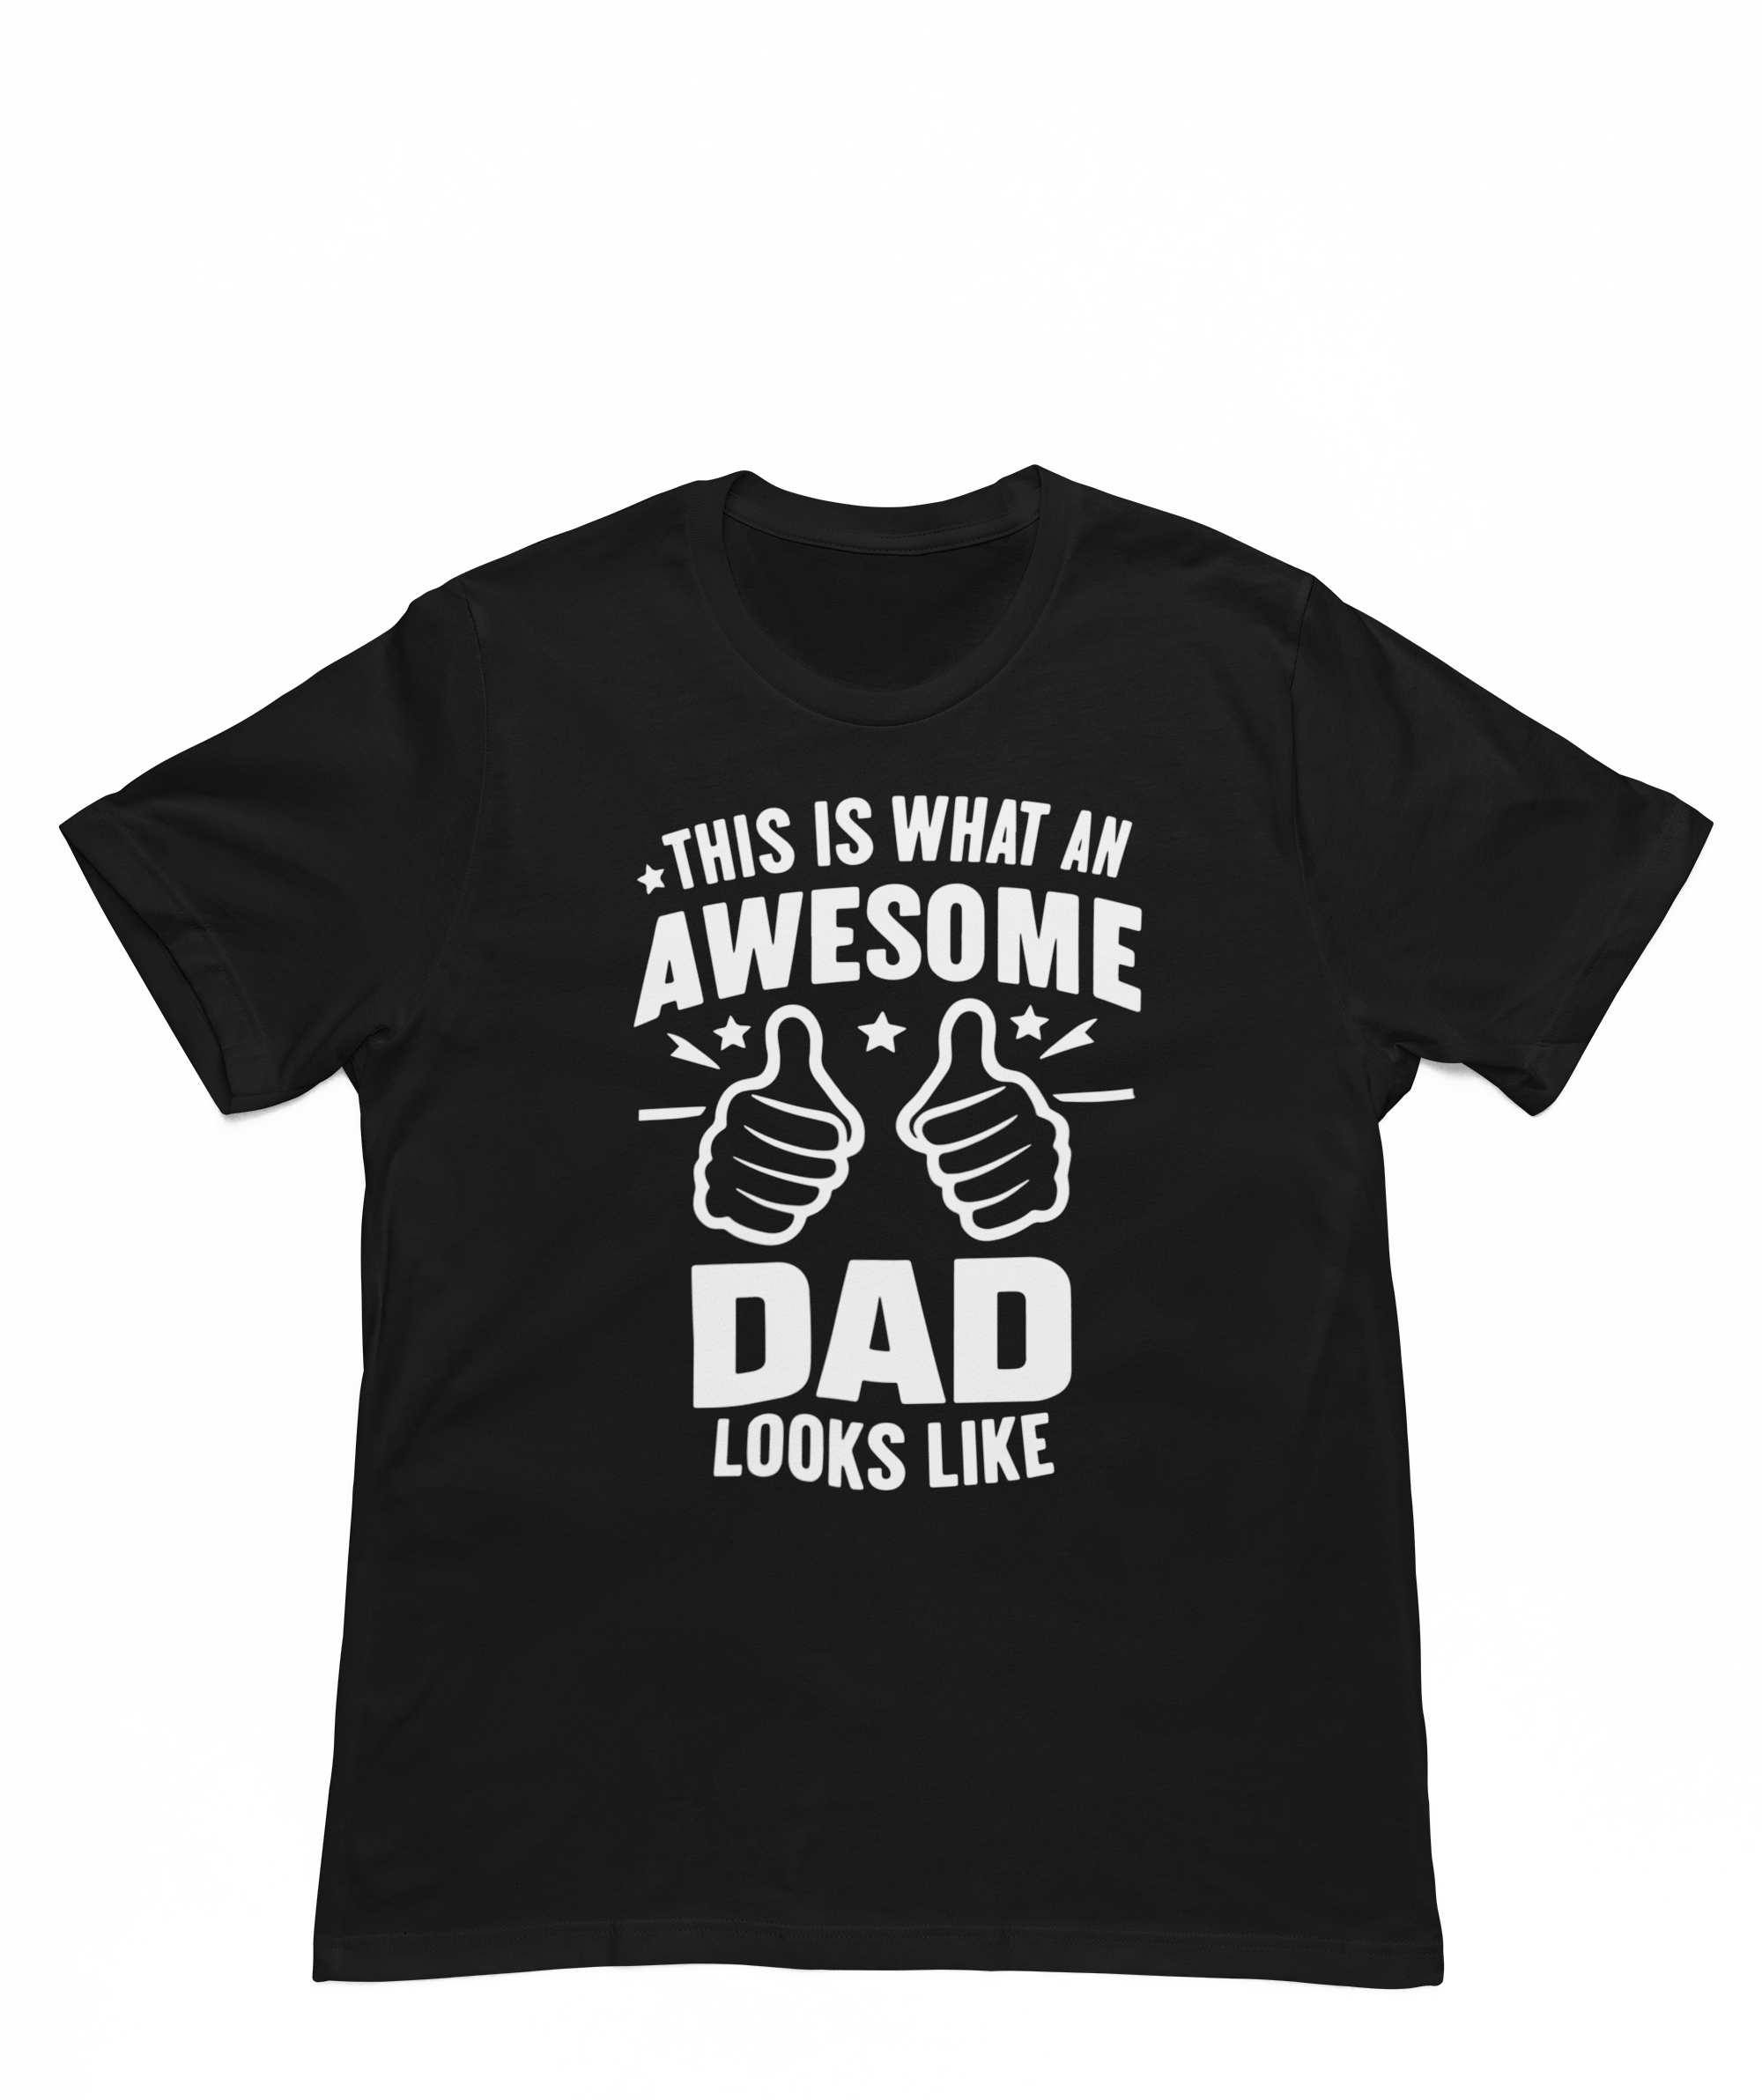 Awesome dad t-shirt - Father's Day gift